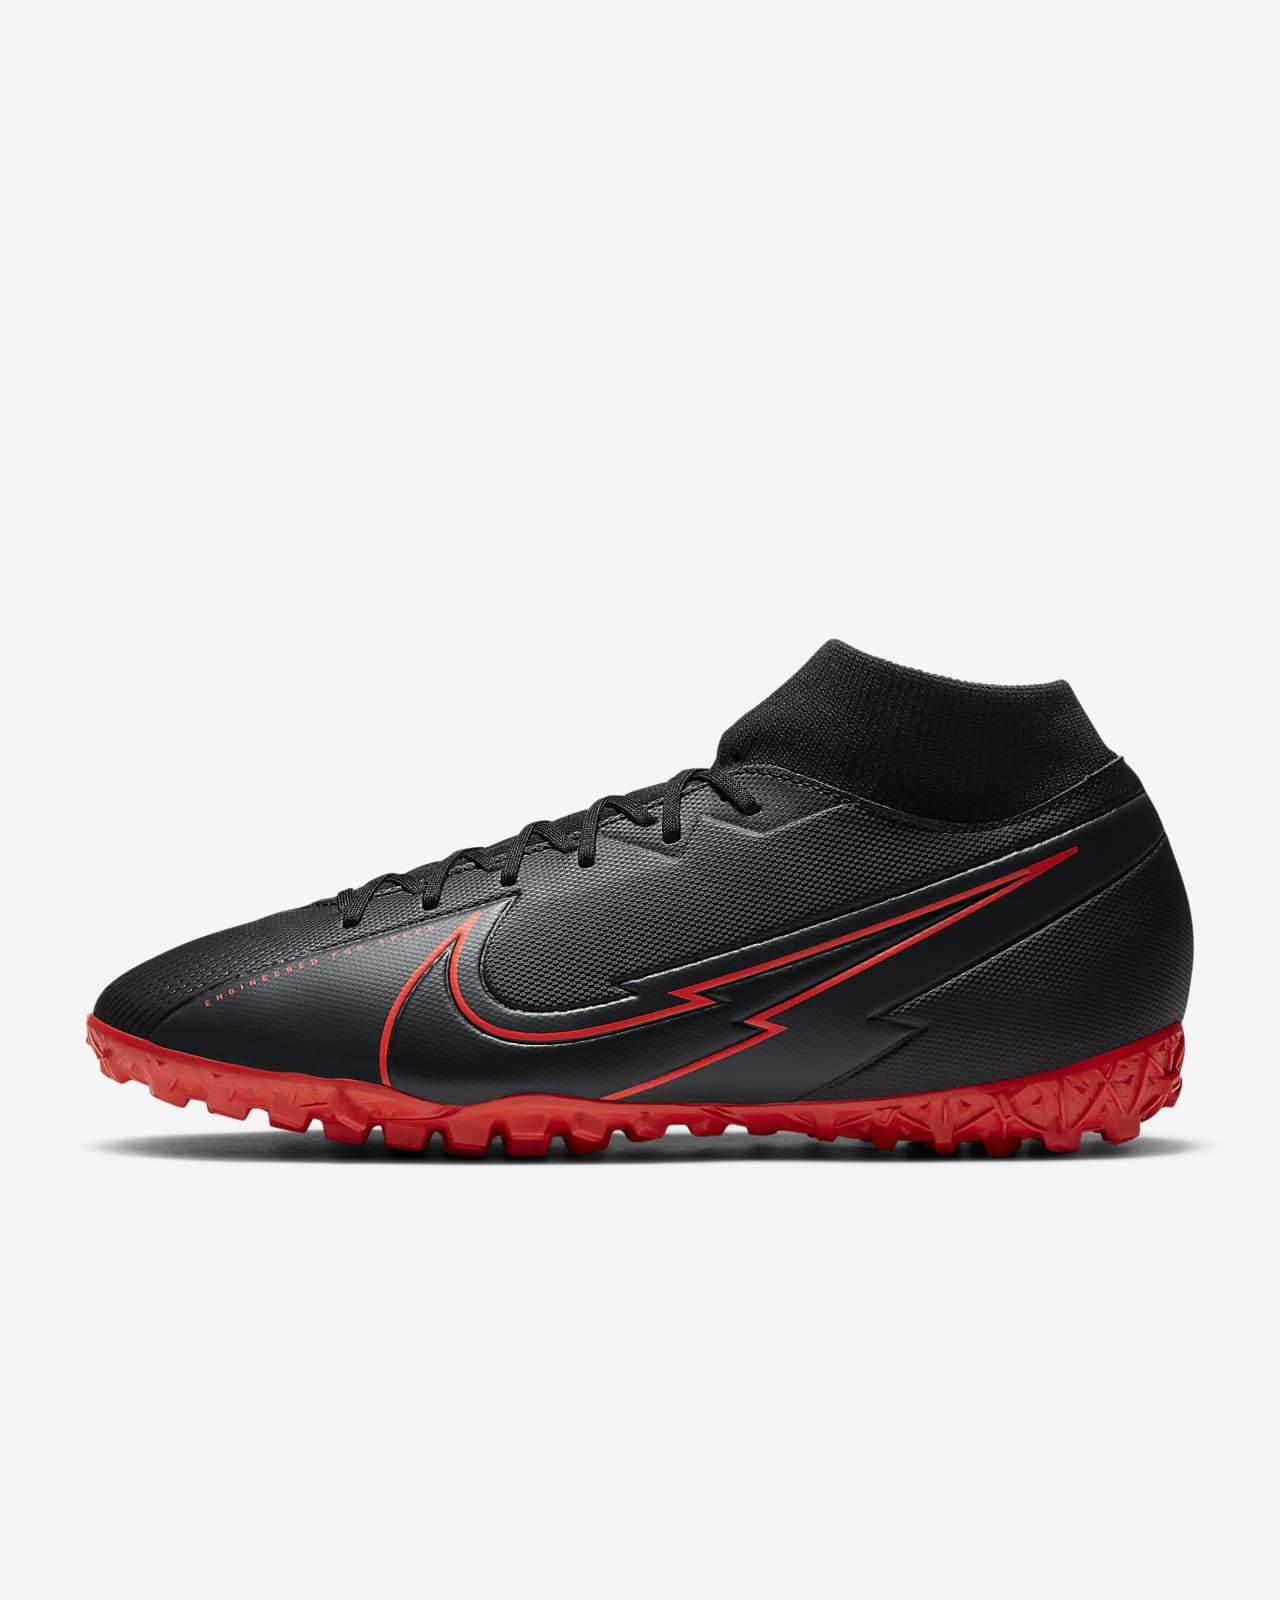 mercurial football shoes